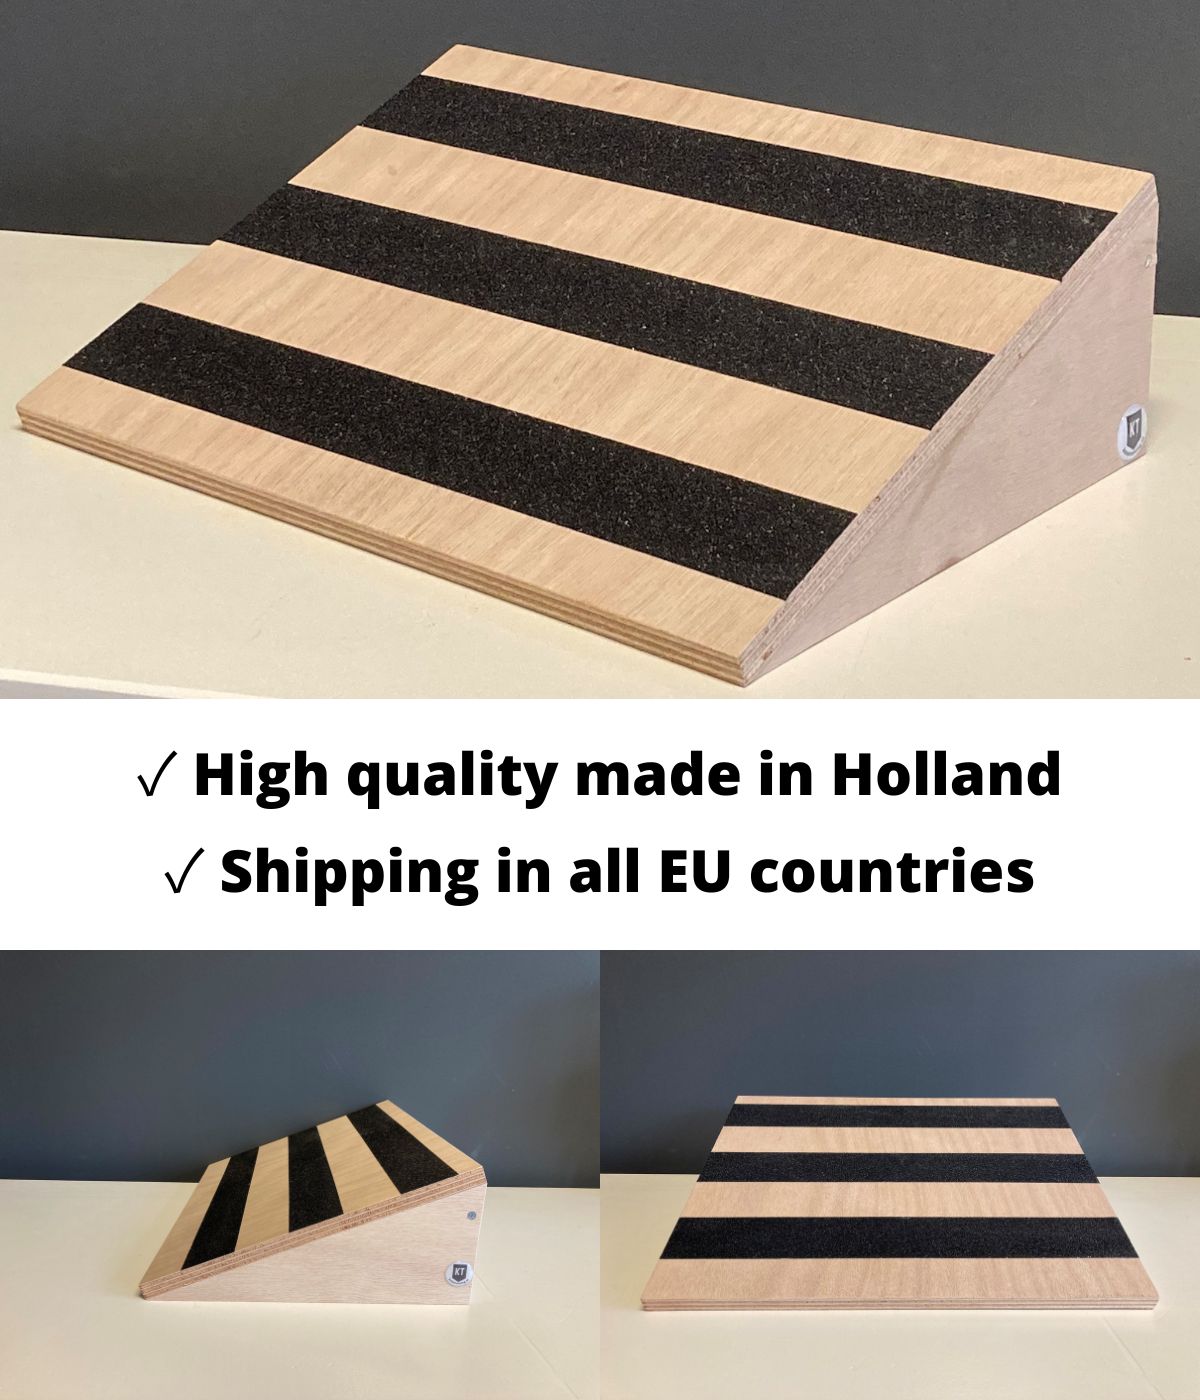 Slant Board ✓ High quality made in Holland